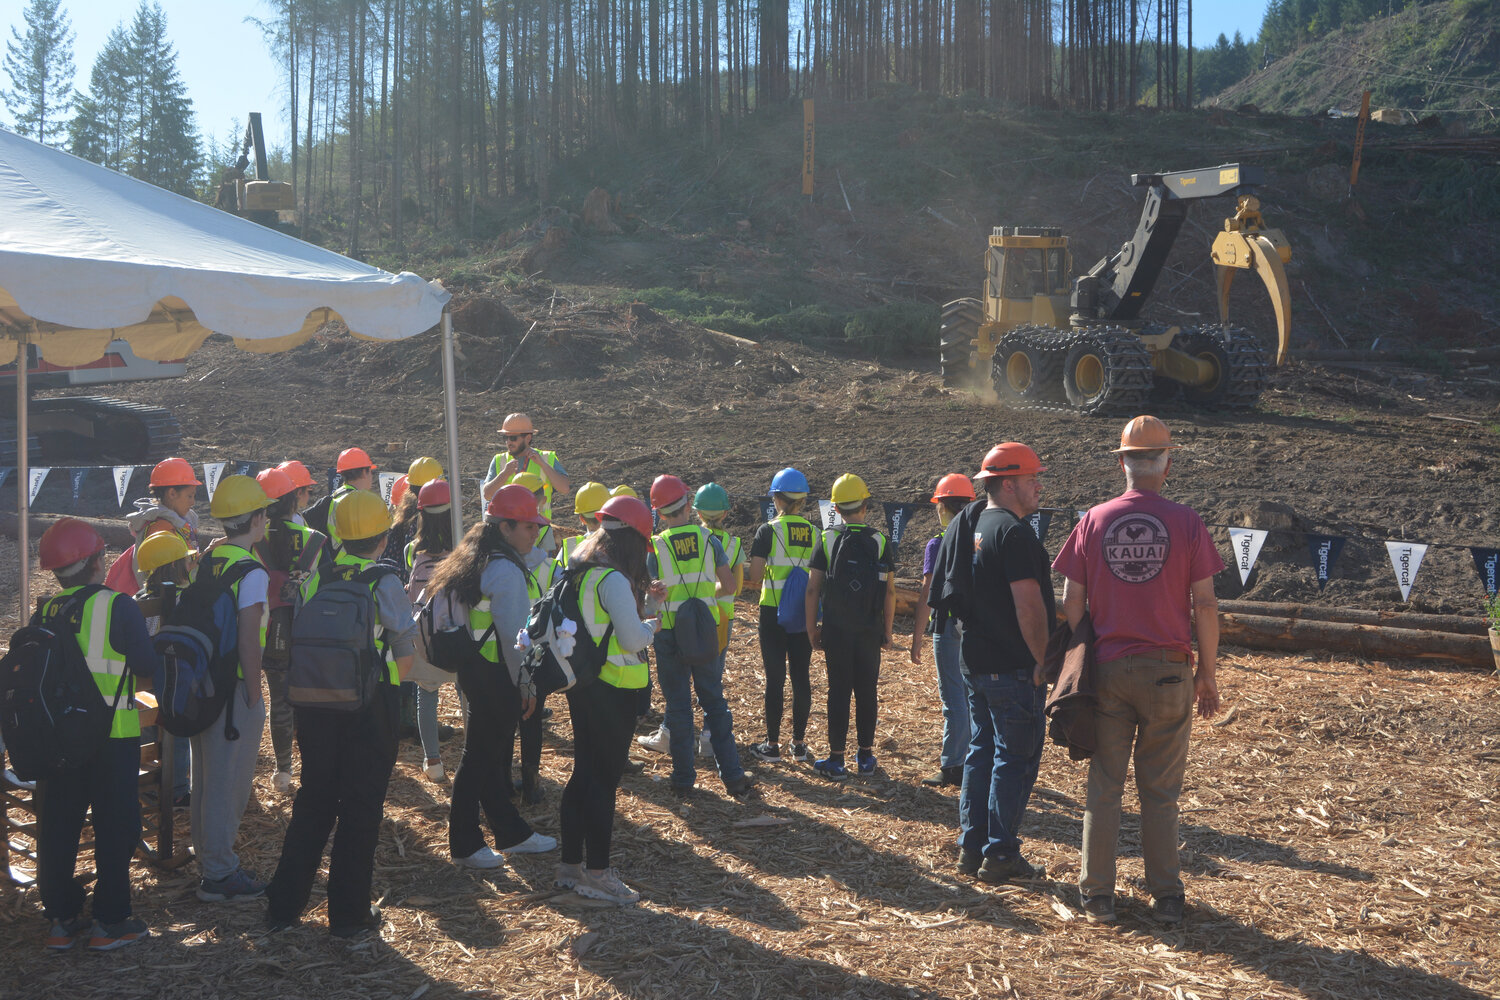 Students gather to observe an 875E logger and listen to a presenter at the Pacific Logging Congress Live In-Woods Show on Sept. 22.